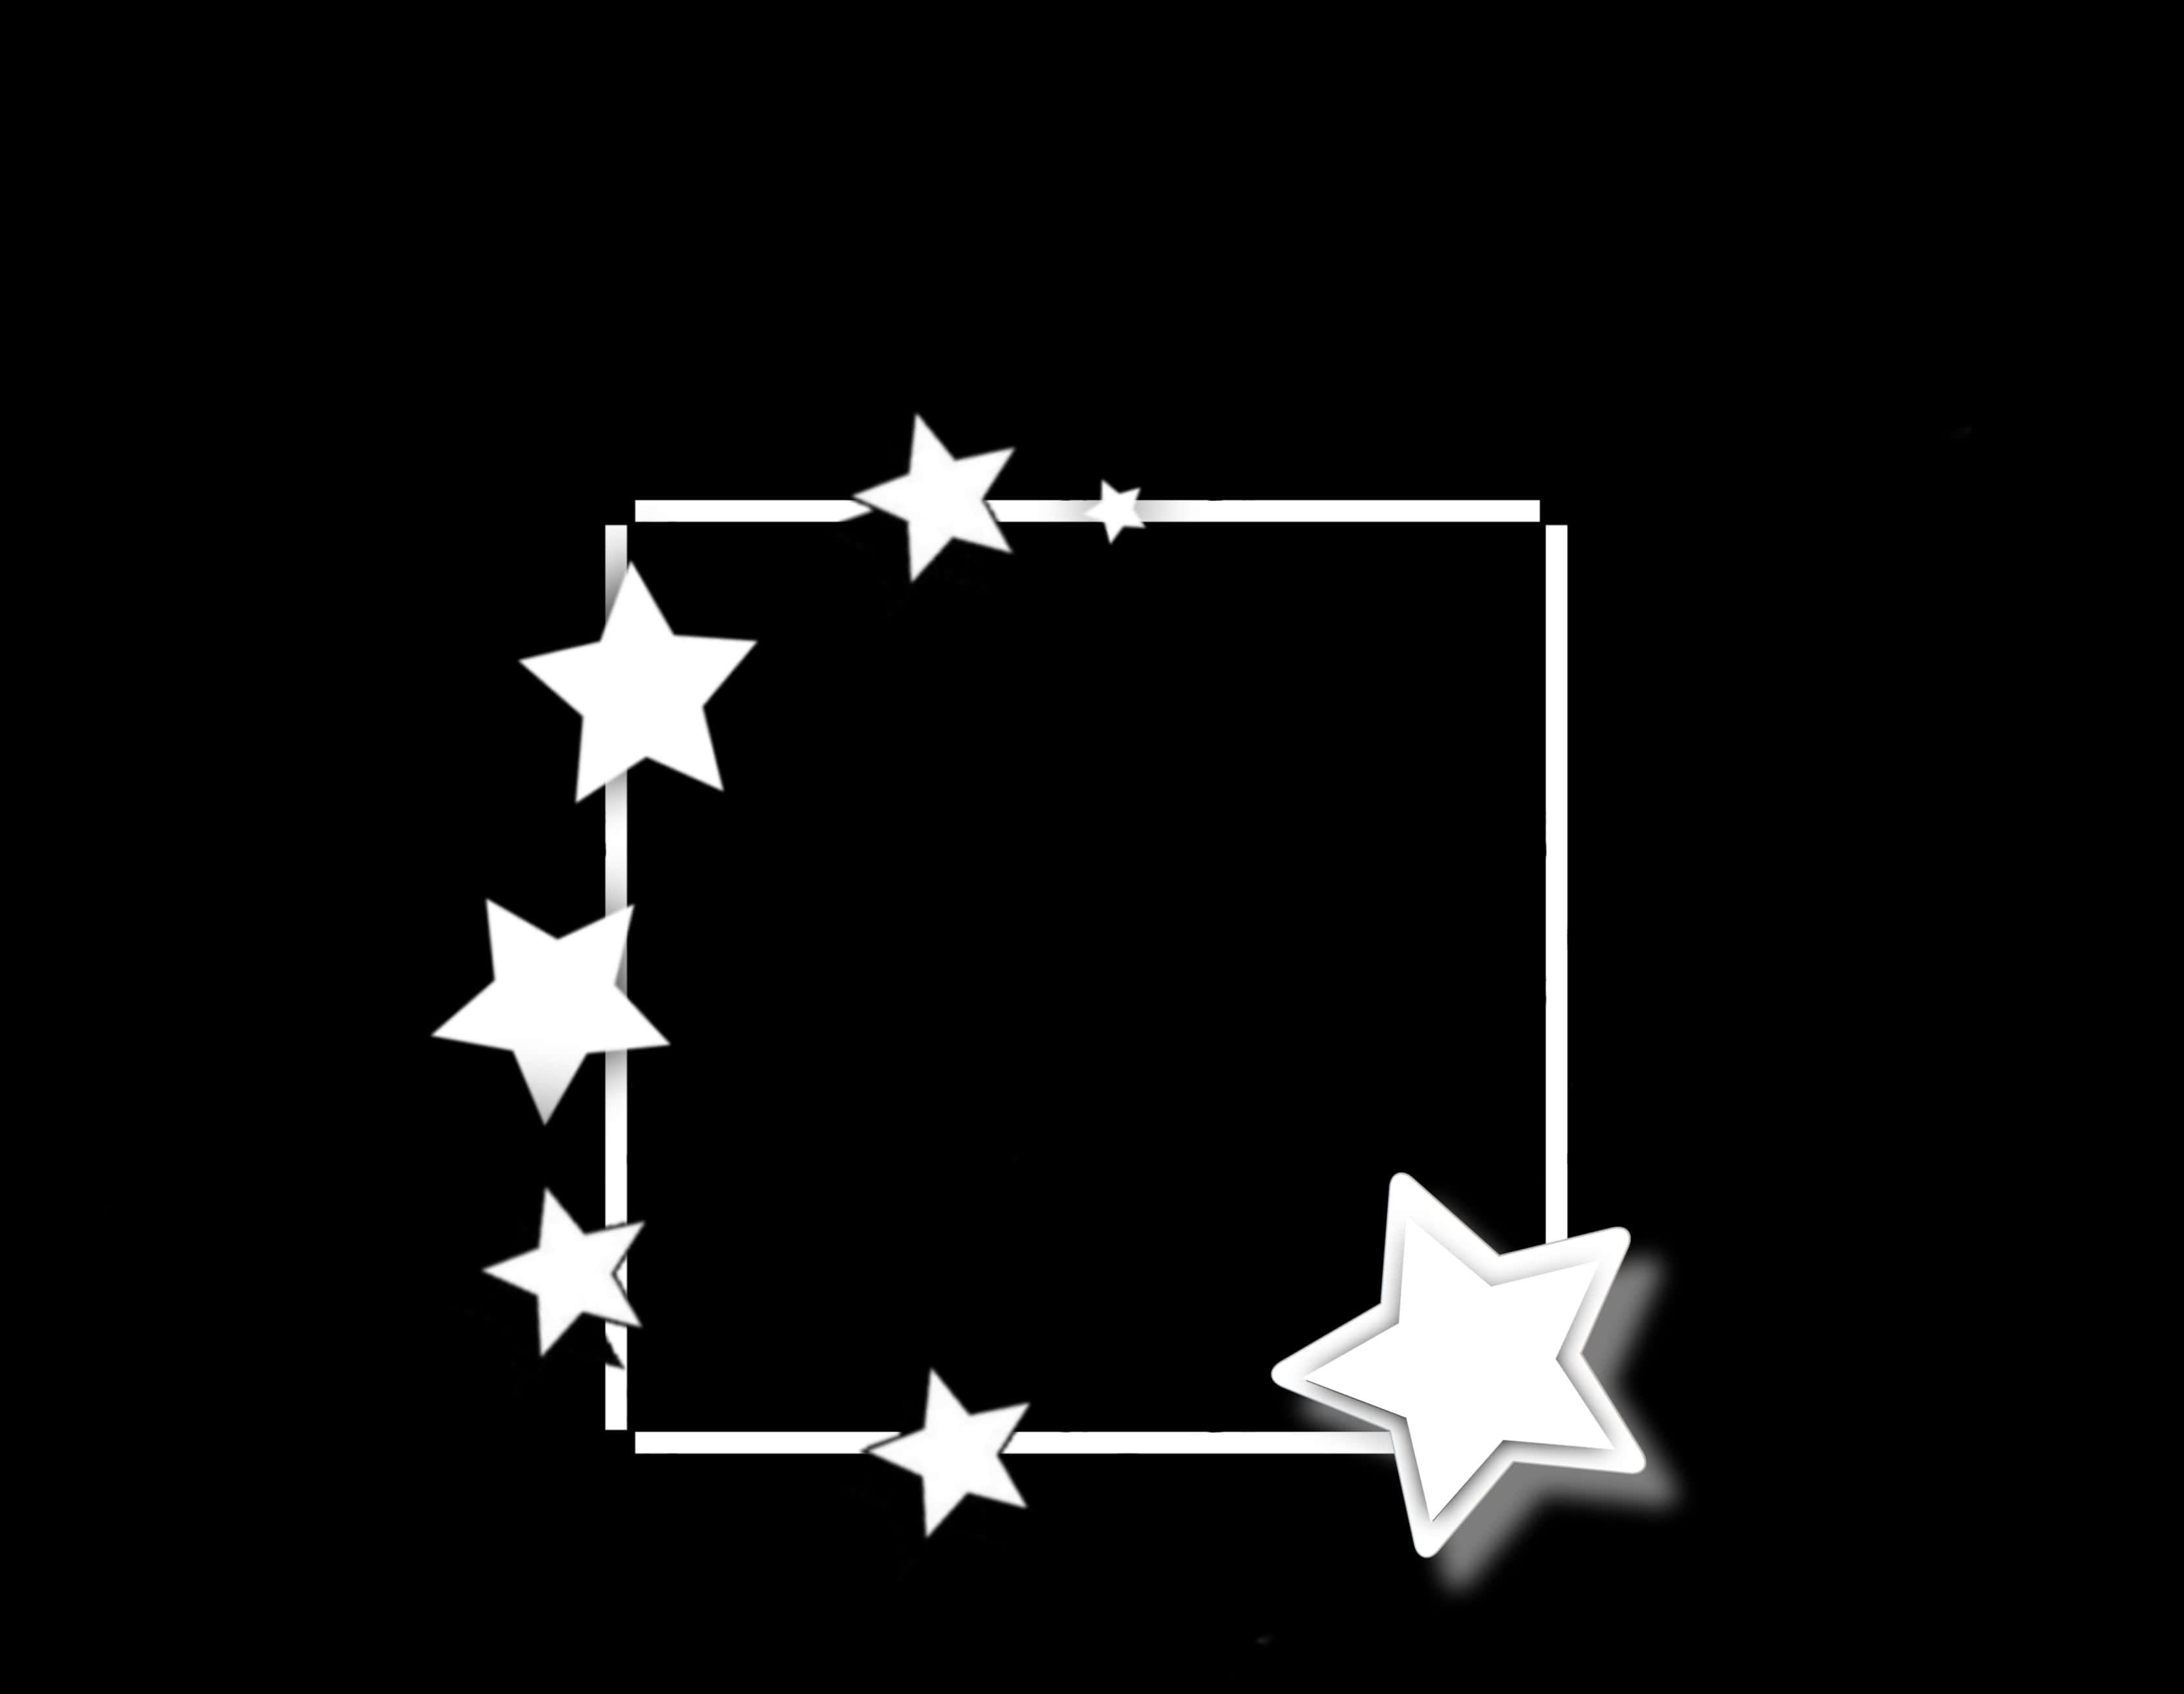 A White Stars In A Square Frame